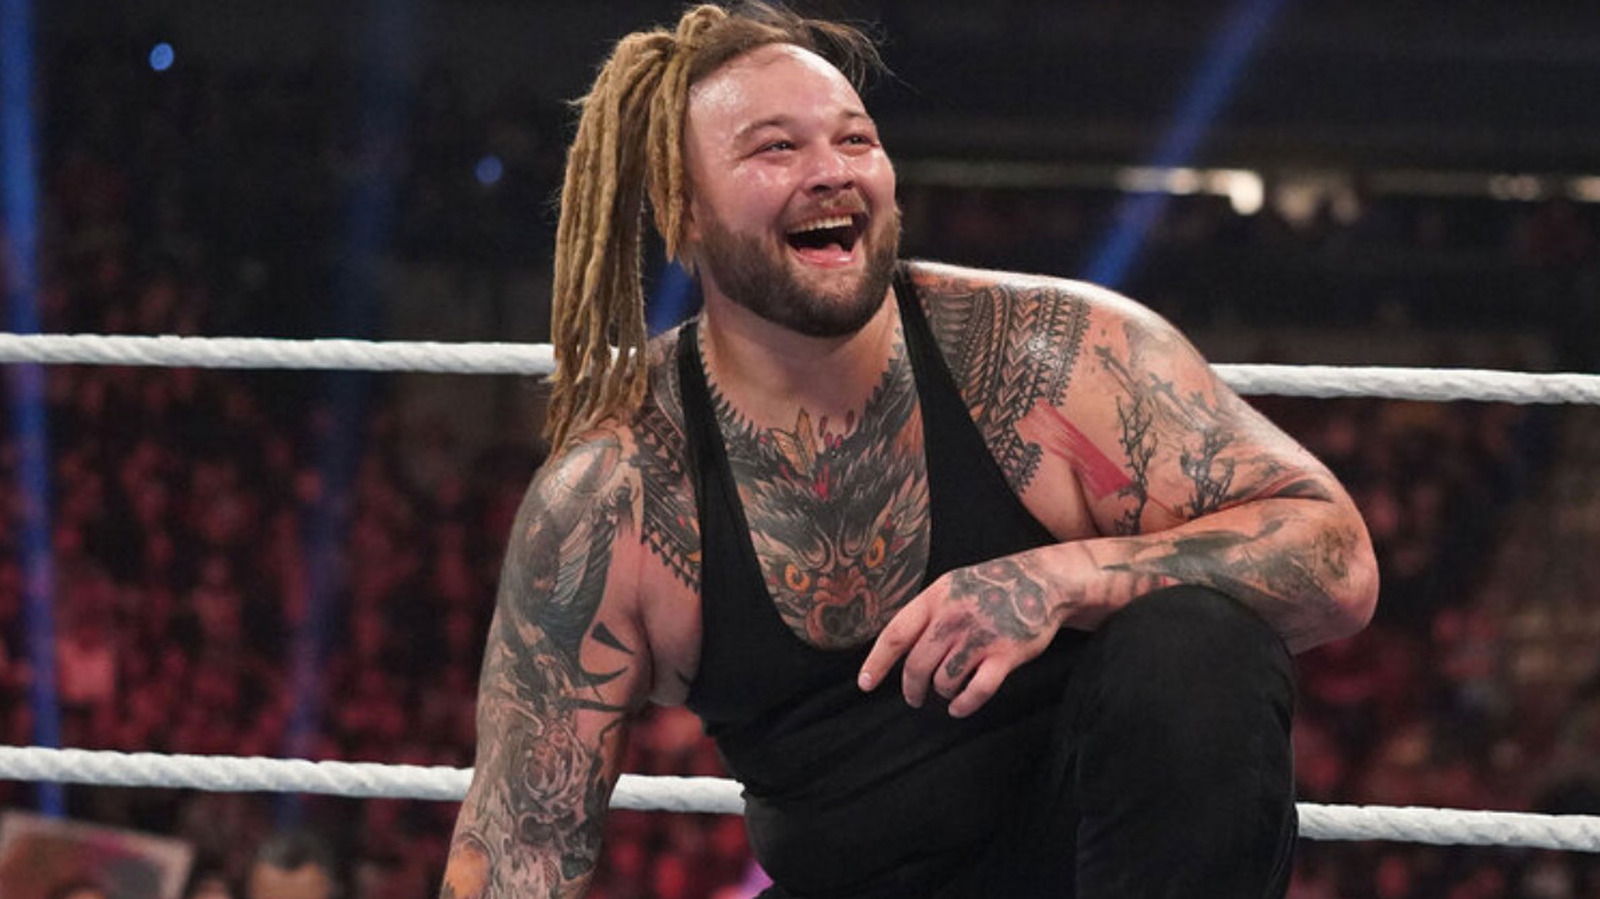 WWE Twitch Video Recaps Previous Clues In Session With 'Missing' Bray Wyatt Therapist